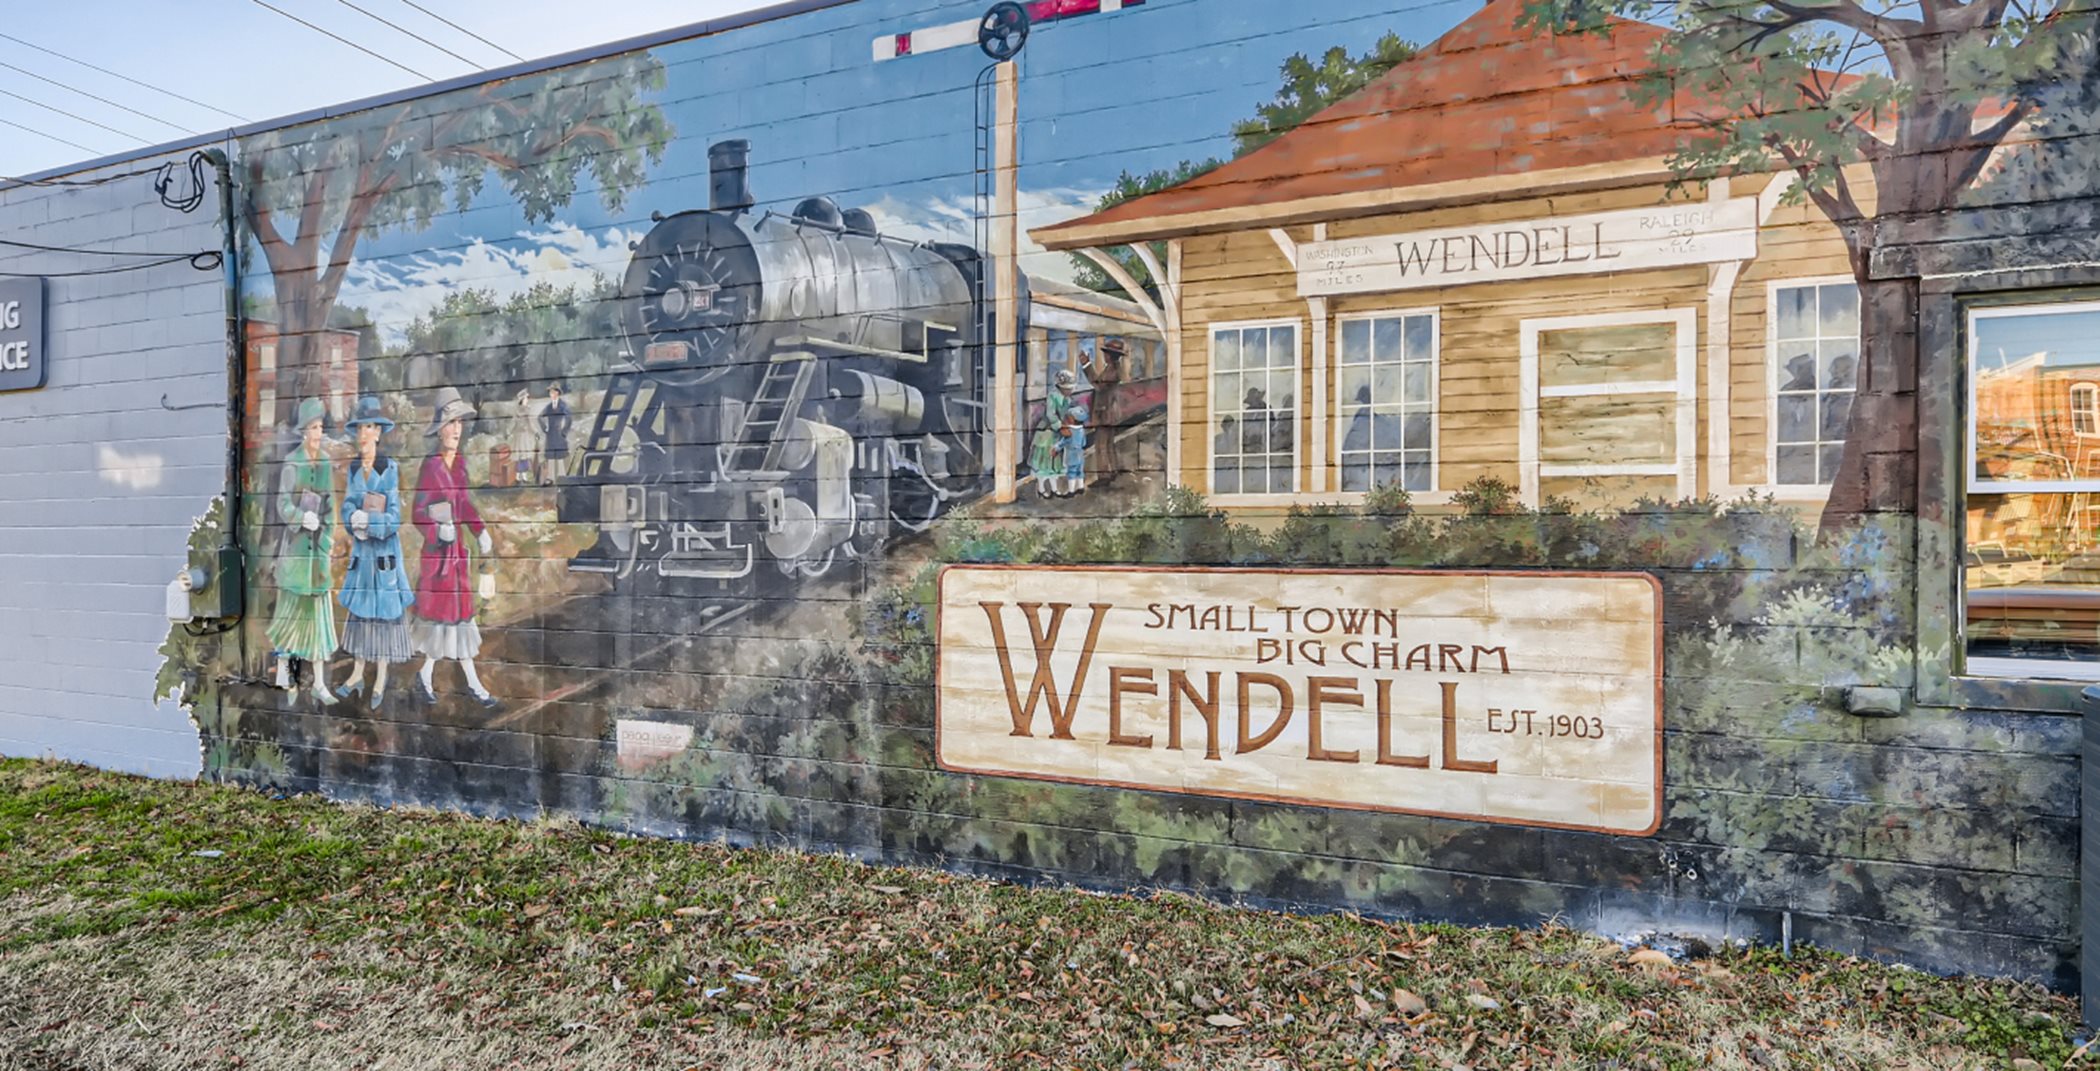 Wendell is a charming small town close to all the attractions of the Triangle